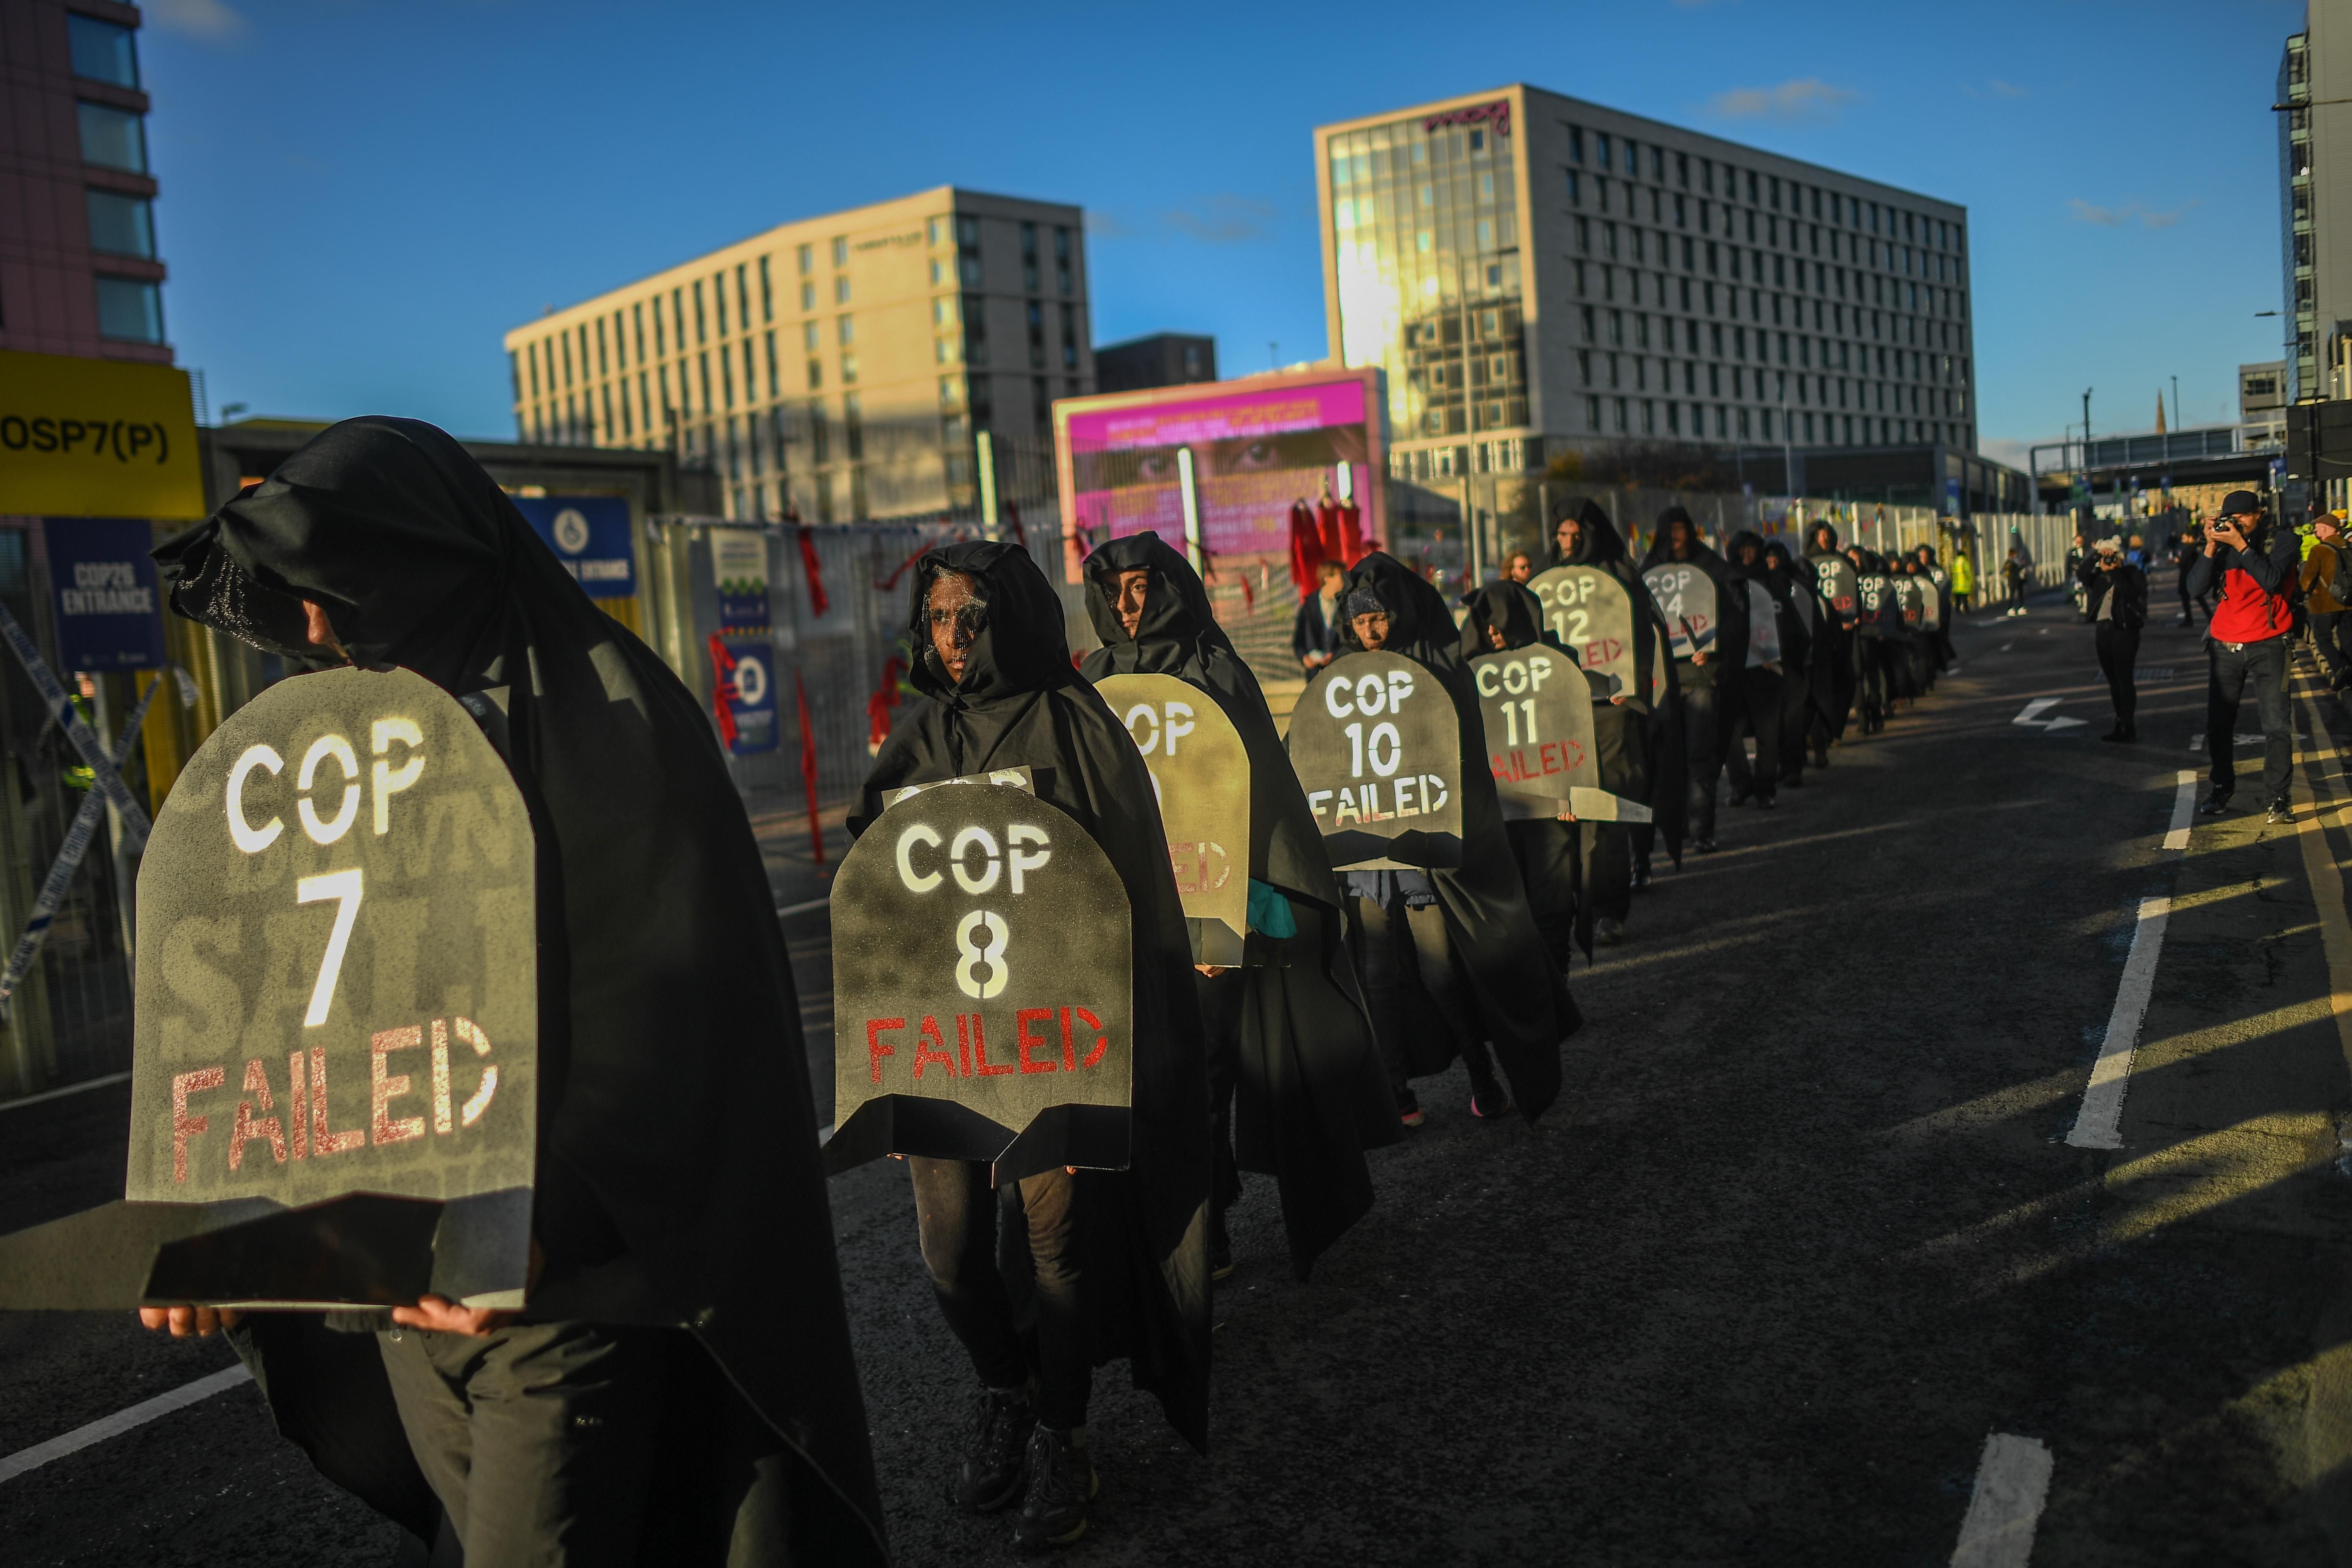 Protesters are seen carrying gravestones with the numbers of COP conferences claiming they have failed during a protest outside the entrance to the COP26 site